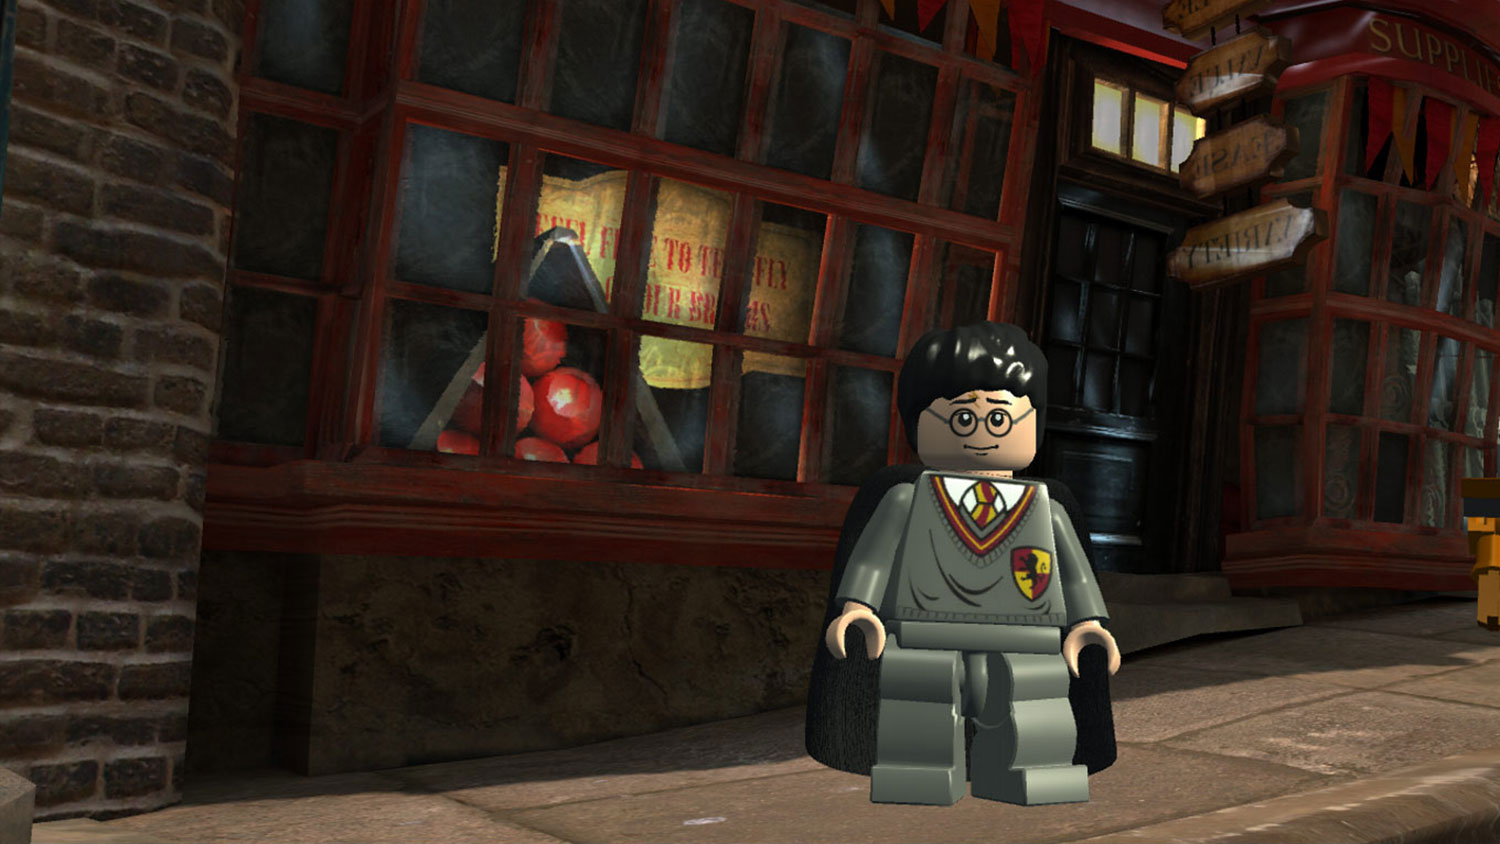 Remastered Lego Harry Potter collection coming to Switch and Xbox